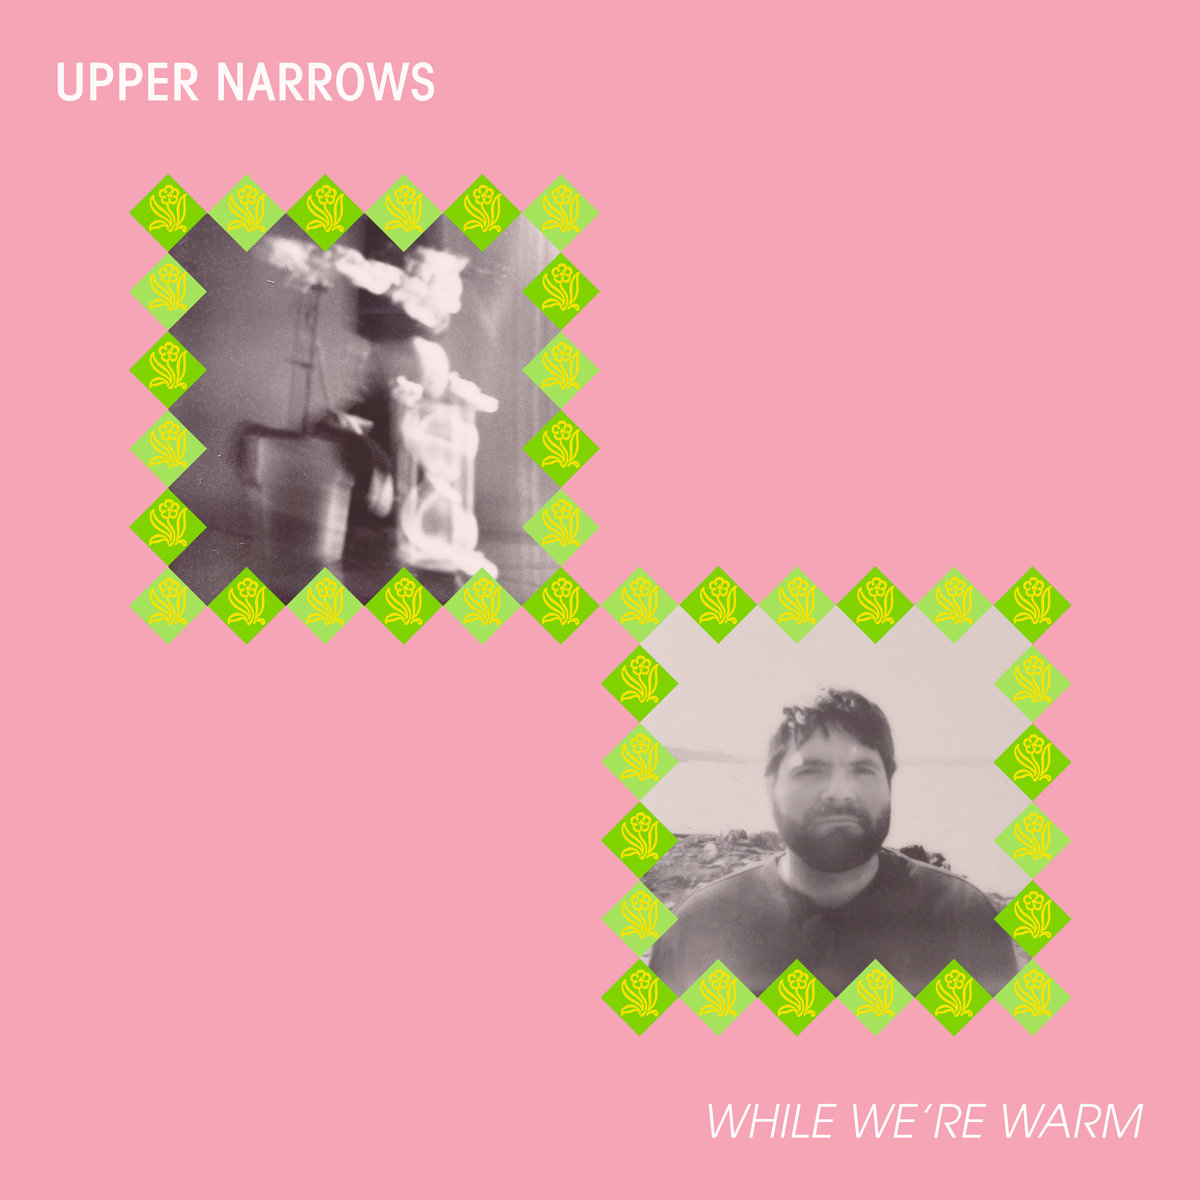 Artwork for While We're Warm by Upper Narrows